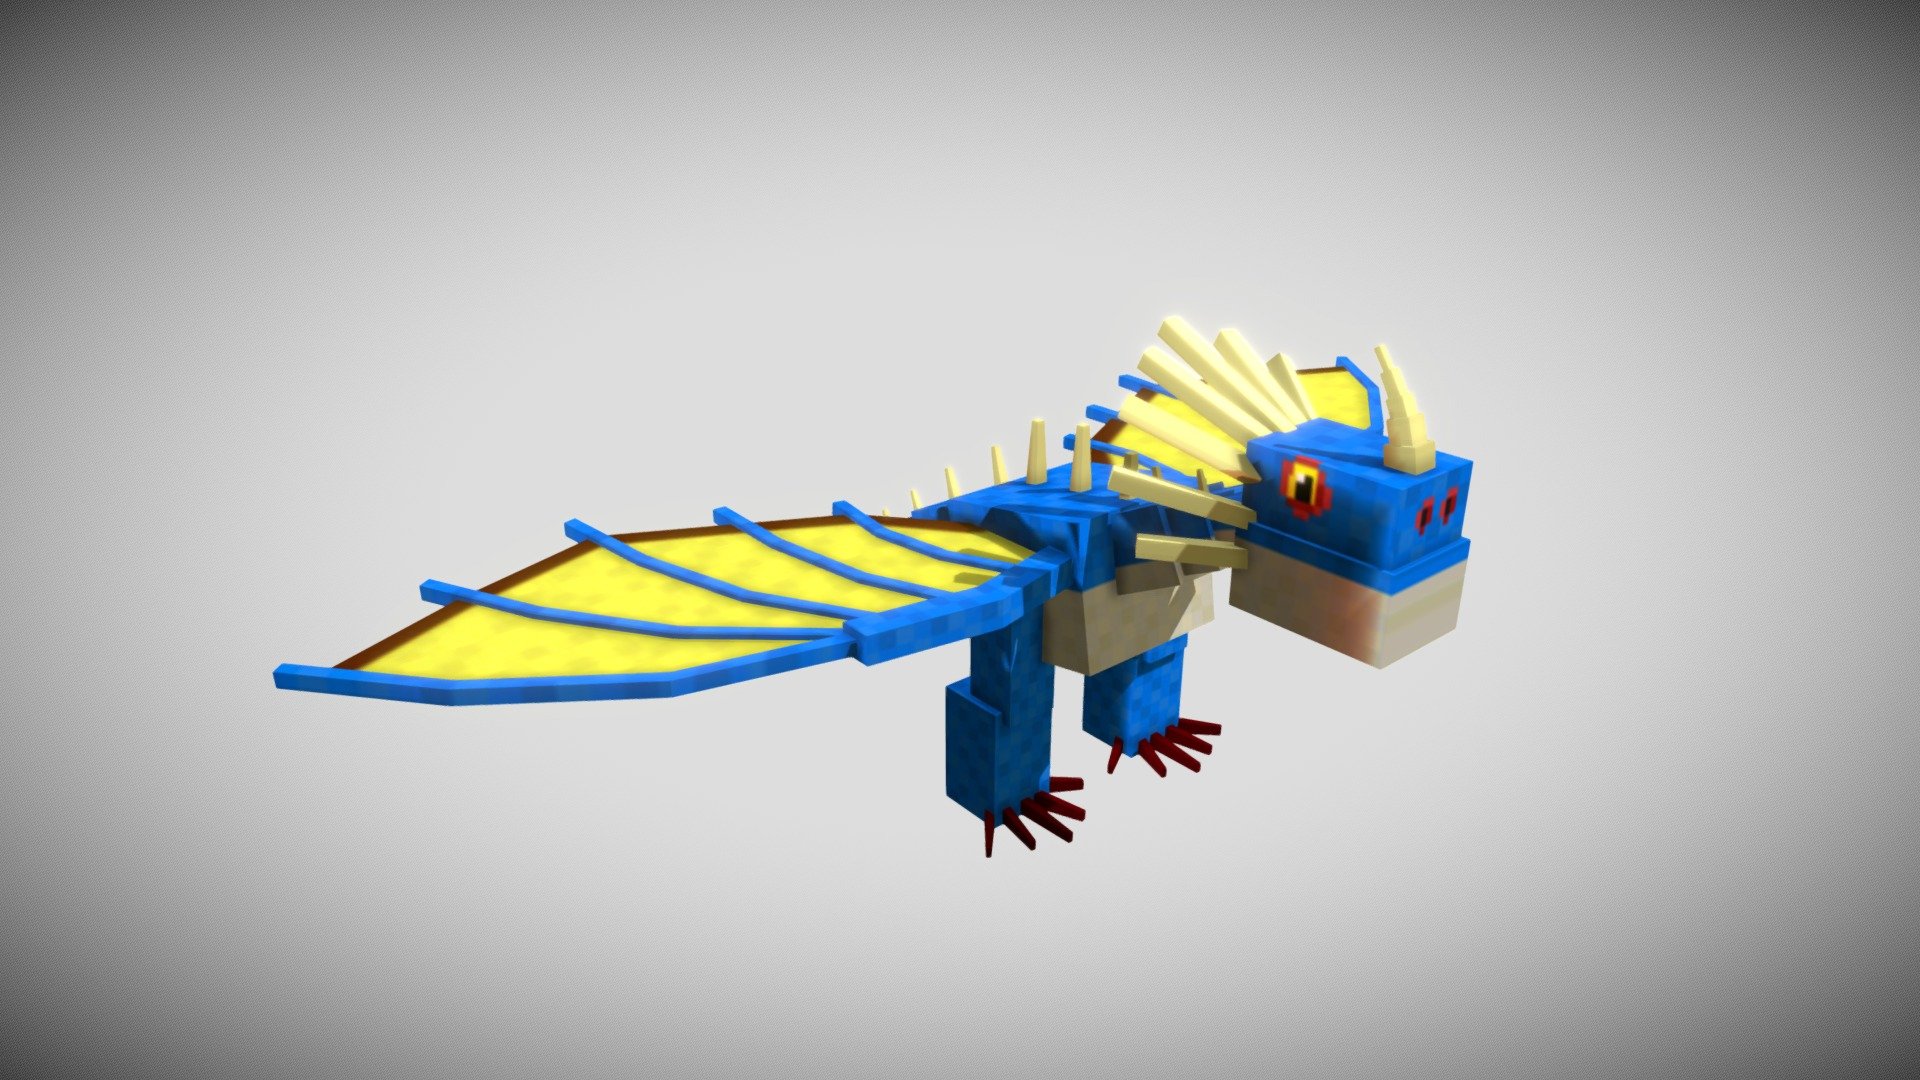 Deadly Nadder Dragon fan art Minecraft style from how to train your dragon movie. Game ready Voxel Art Style 3d model